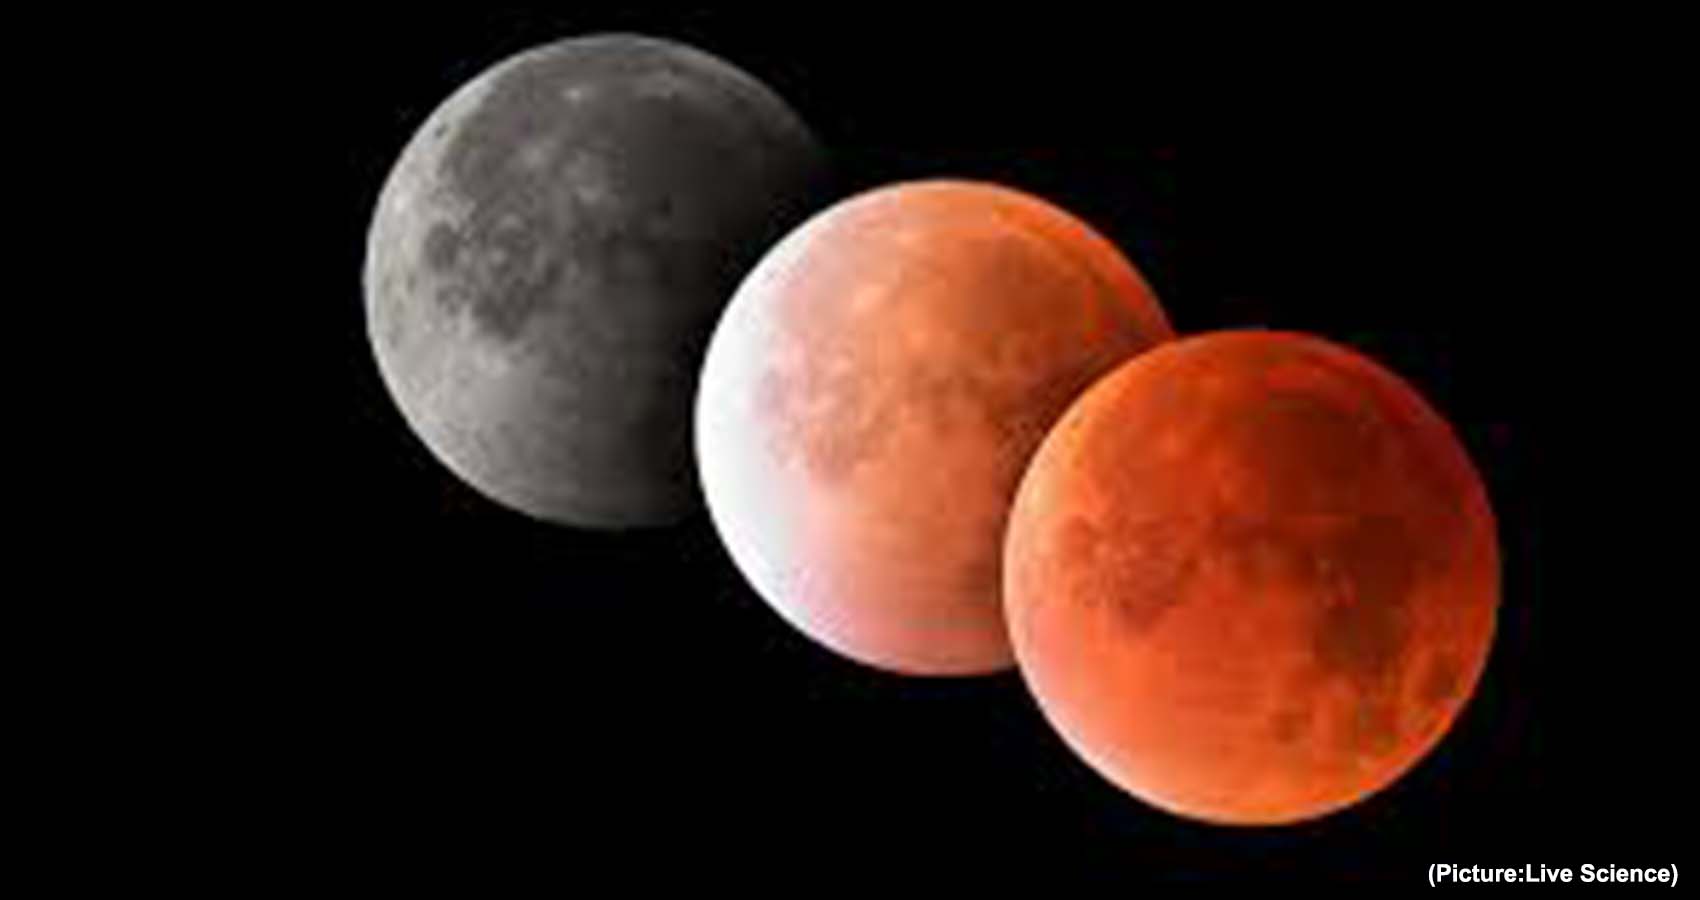 November 19th Will Have Longest Partial Lunar Eclipse In 580 Years